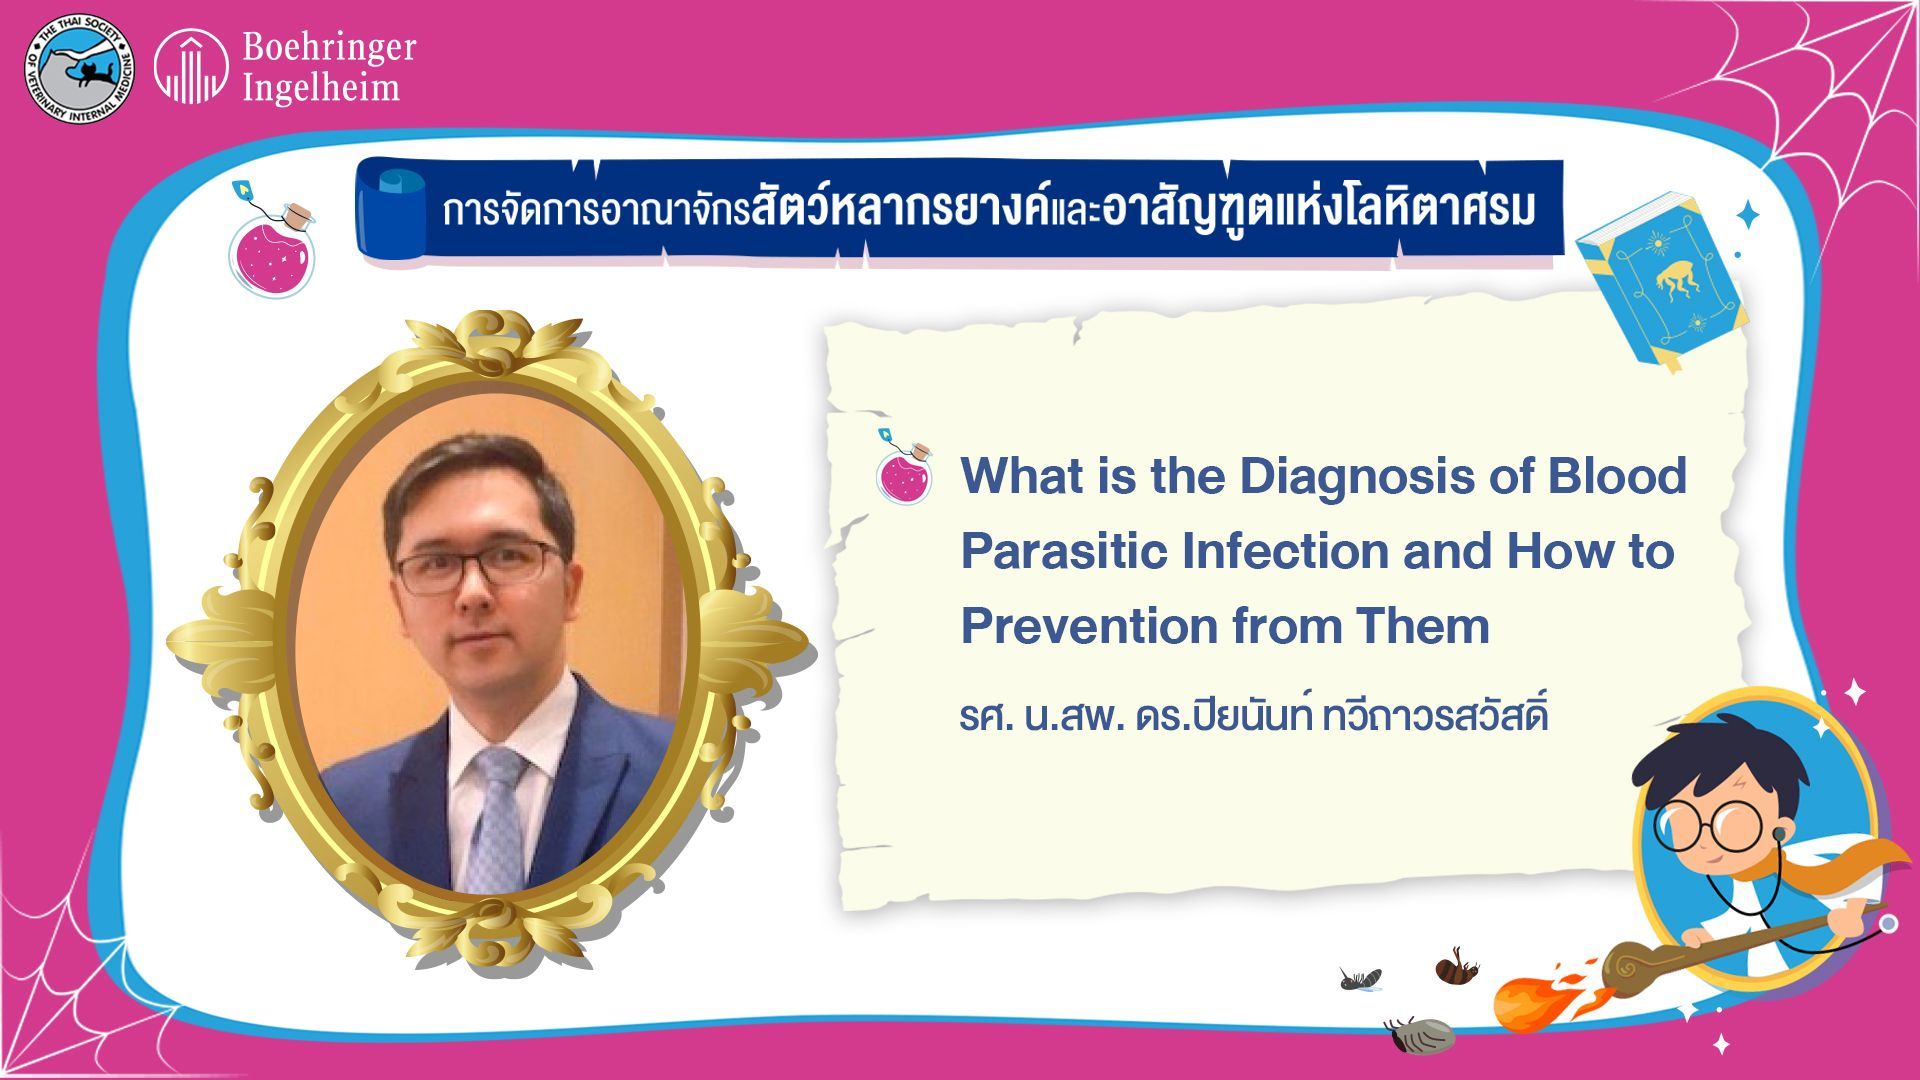 [VDO] Ep.3 - What is the diagnosis of blood parasitic infection and how to prevent from them